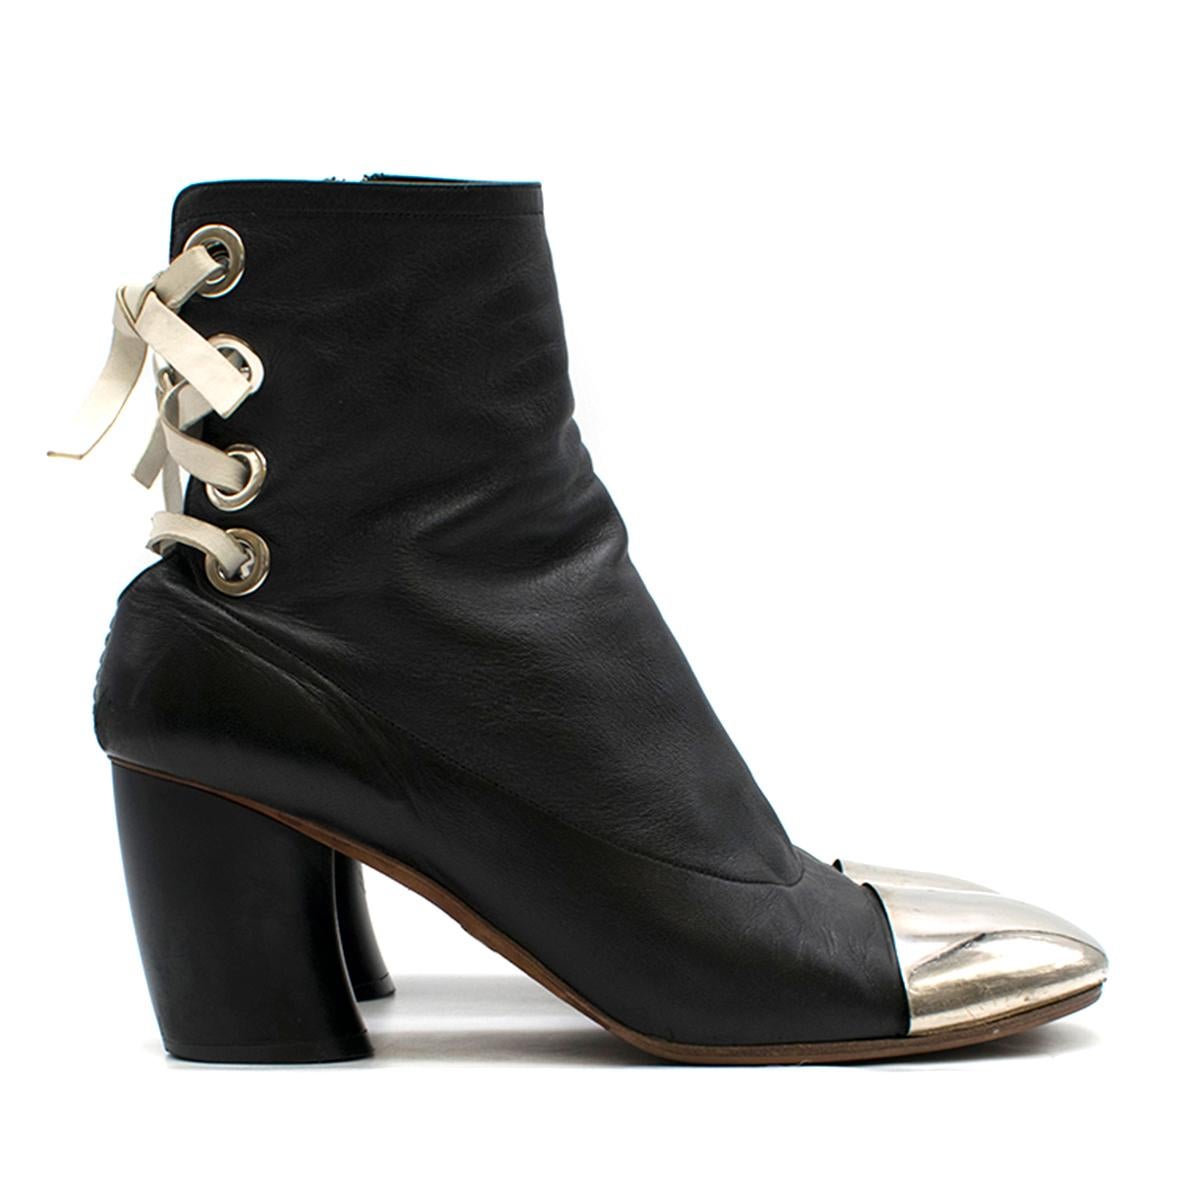 Proenza Schouler metal-cap lace-back leather ankle boots

- Black, soft-touch leather 
- Round toe, mid-high black curved cone heel 
- Silver-tone metal toe caps
- White lace-up leather back feature
- Inner side-zip fastening 
- Red leather insole,